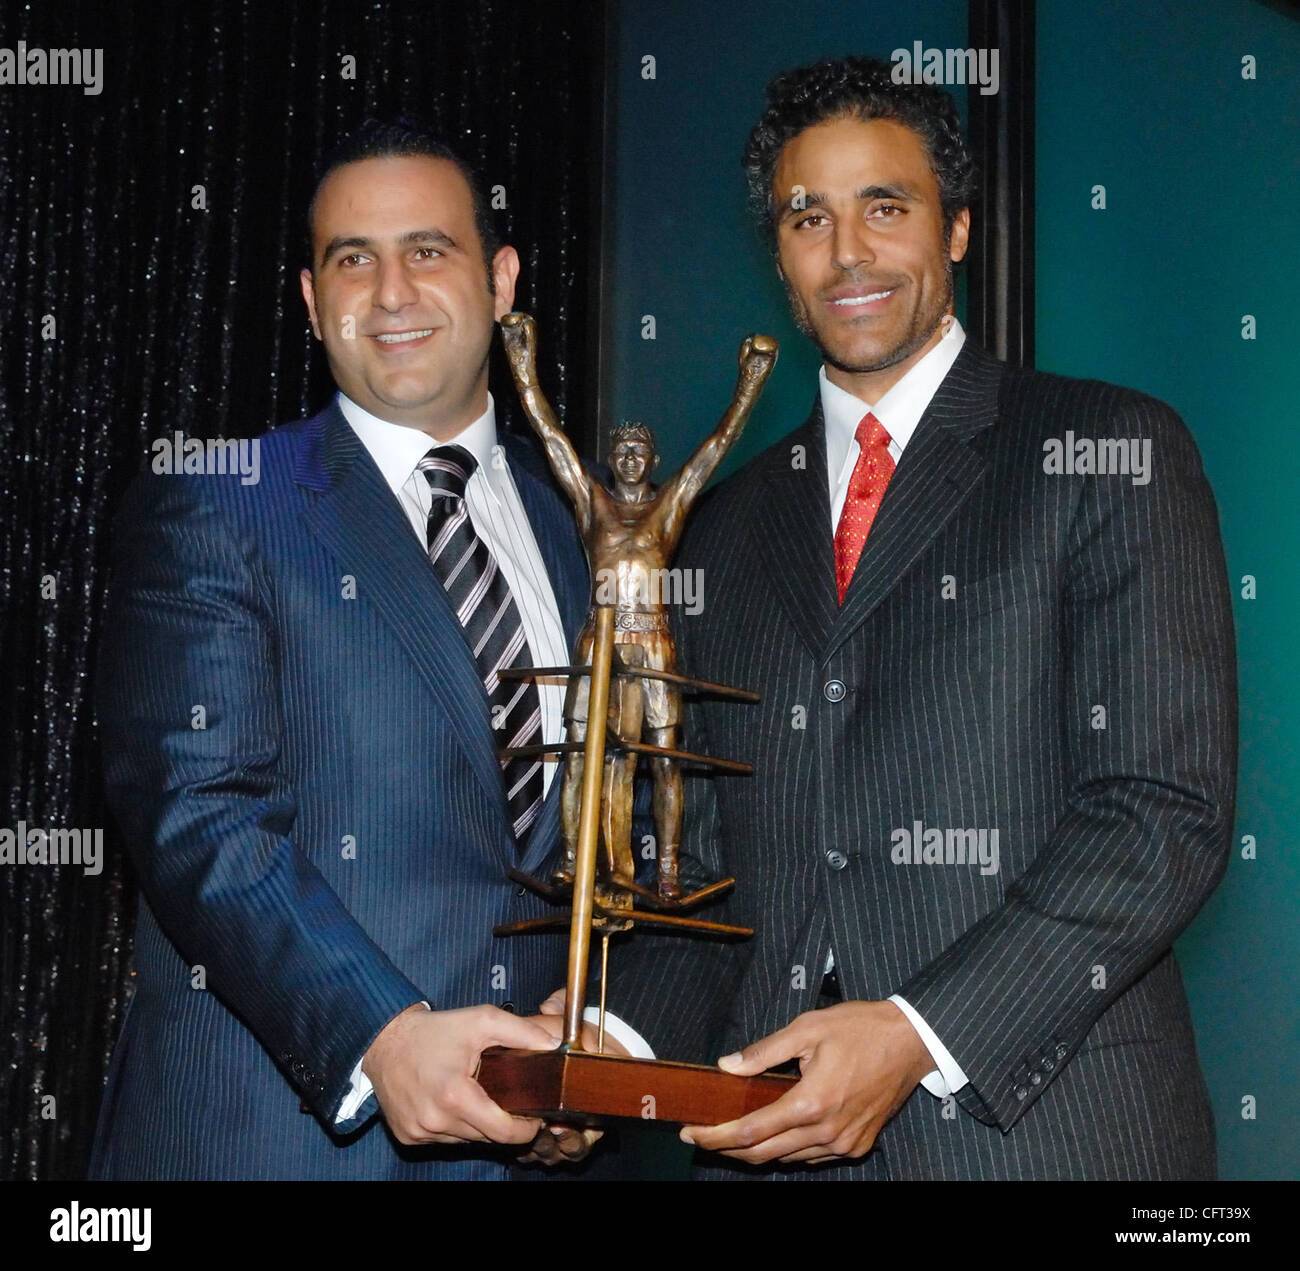 Sam Nazarian and Rick Fox attend The 6th Annual Evening of Champions to benefit The Oscar De La Hoya Foundation. 12/6/06, Beverly Hills, CA, Rob DeLorenzo Stock Photo